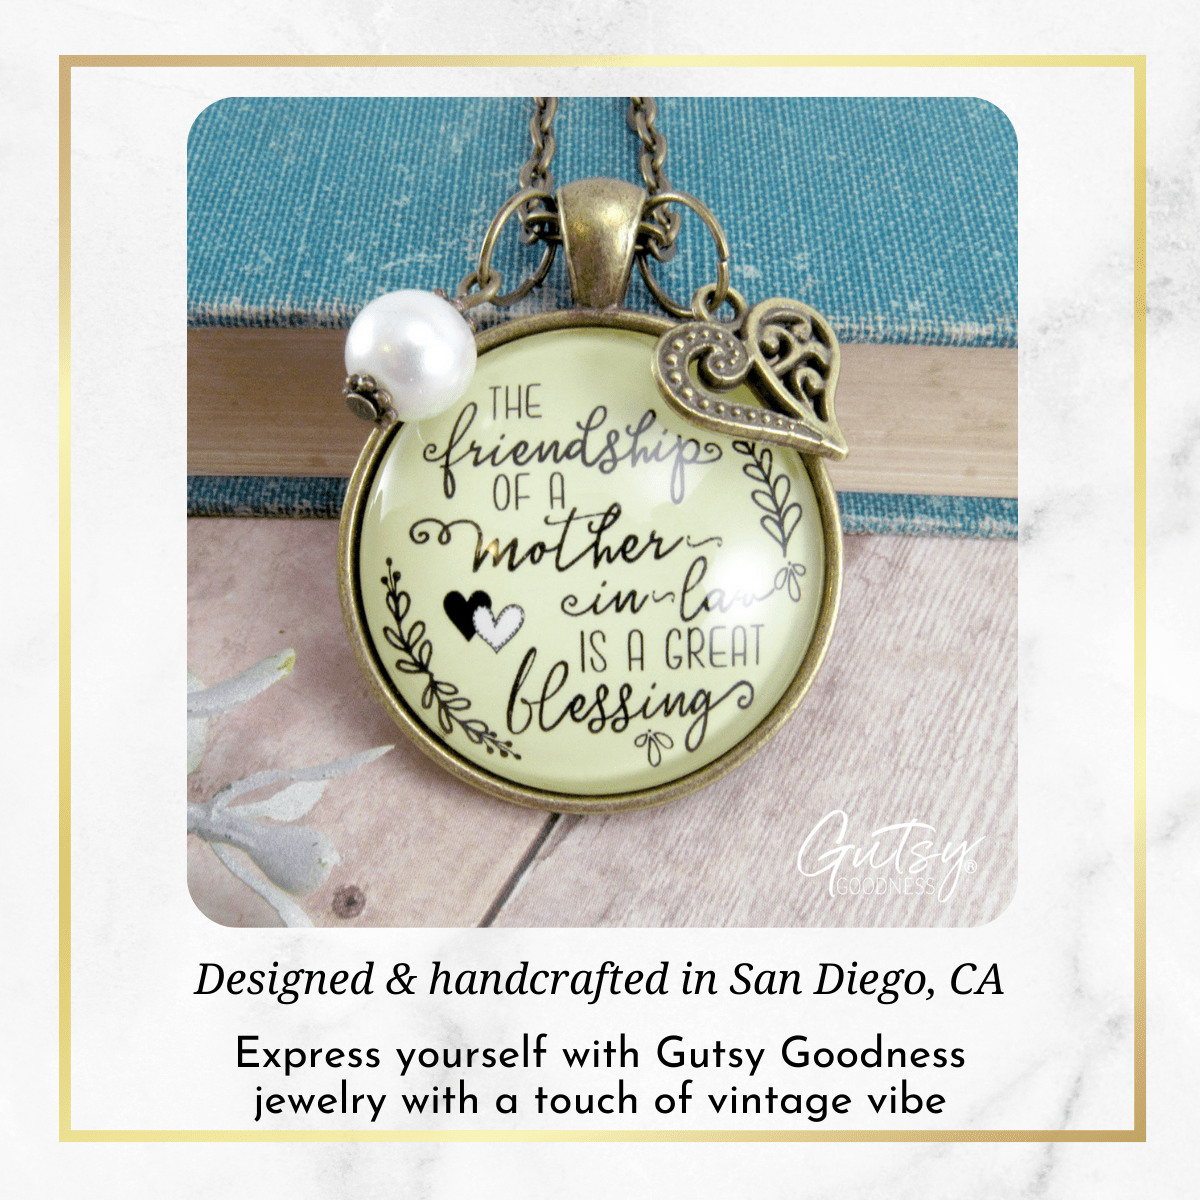 Gutsy Goodness Mother In Law Necklace Friendship Blessing Gift Meanful New Mom Wedding Jewelry - Gutsy Goodness Handmade Jewelry;Mother In Law Necklace Friendship Blessing Gift Meanful New Mom Wedding Jewelry - Gutsy Goodness Handmade Jewelry Gifts